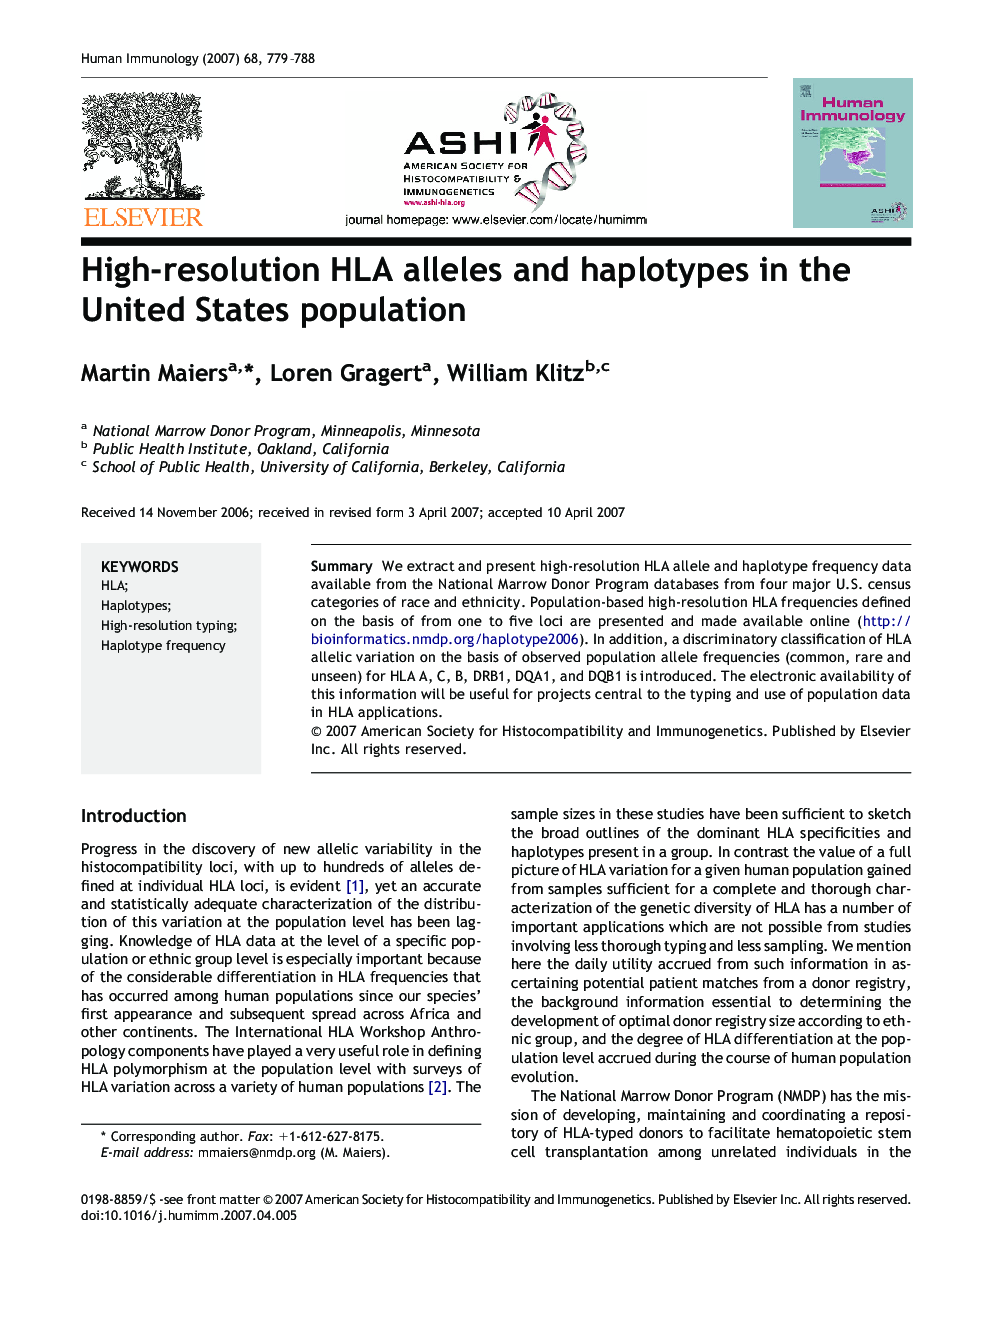 High-resolution HLA alleles and haplotypes in the United States population